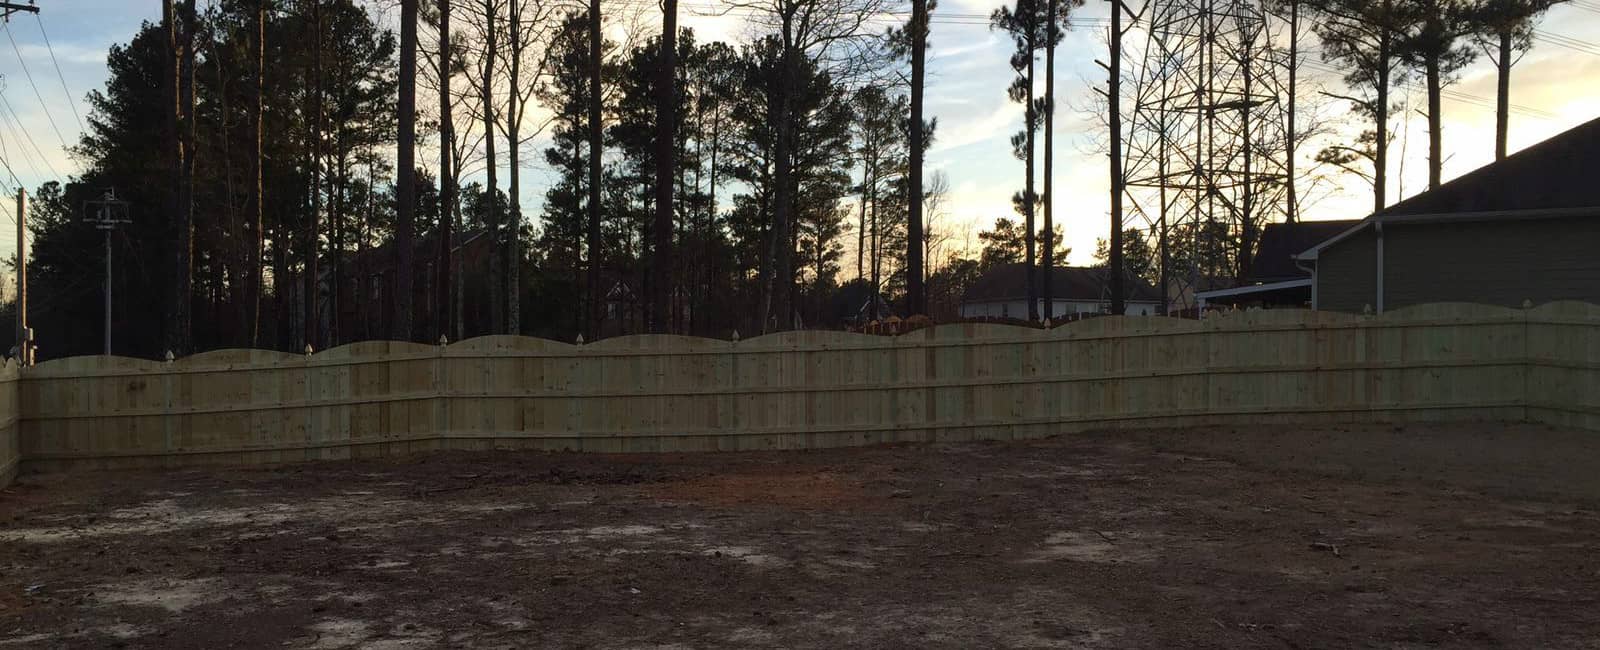 SDF - Arched Privacy Fence 2.jpg